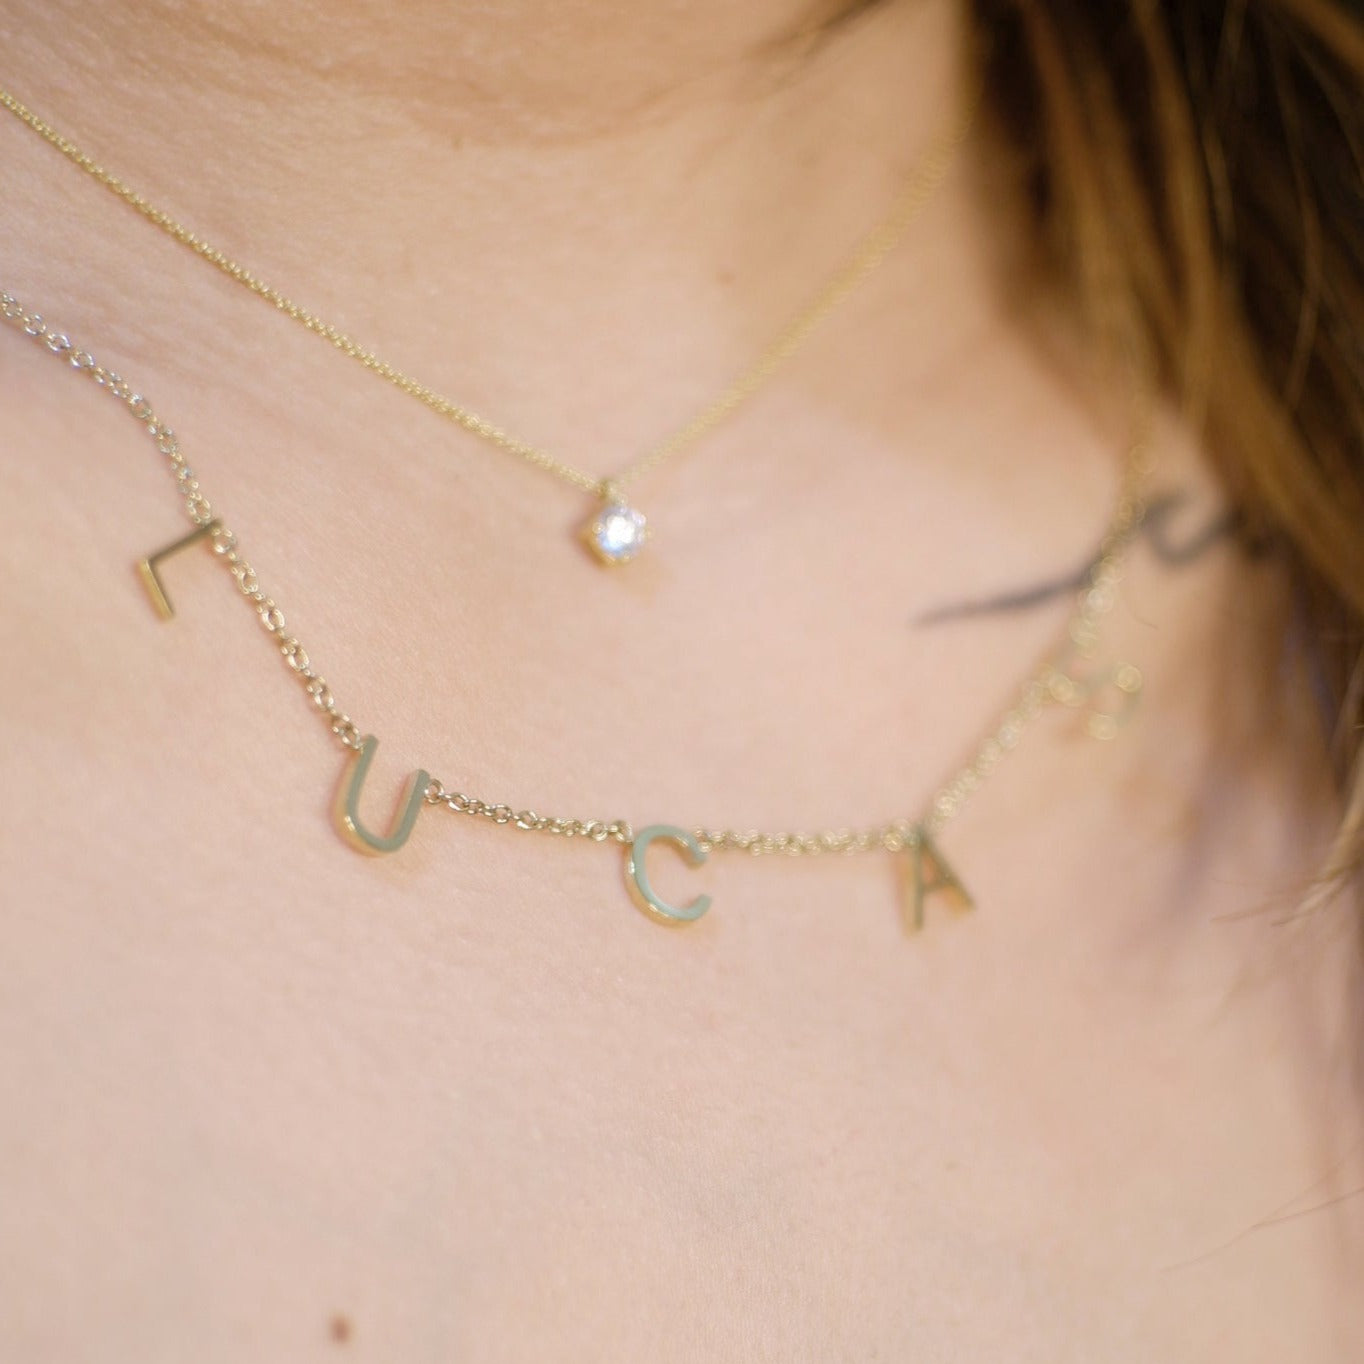 The Centered Initial / Name Necklace